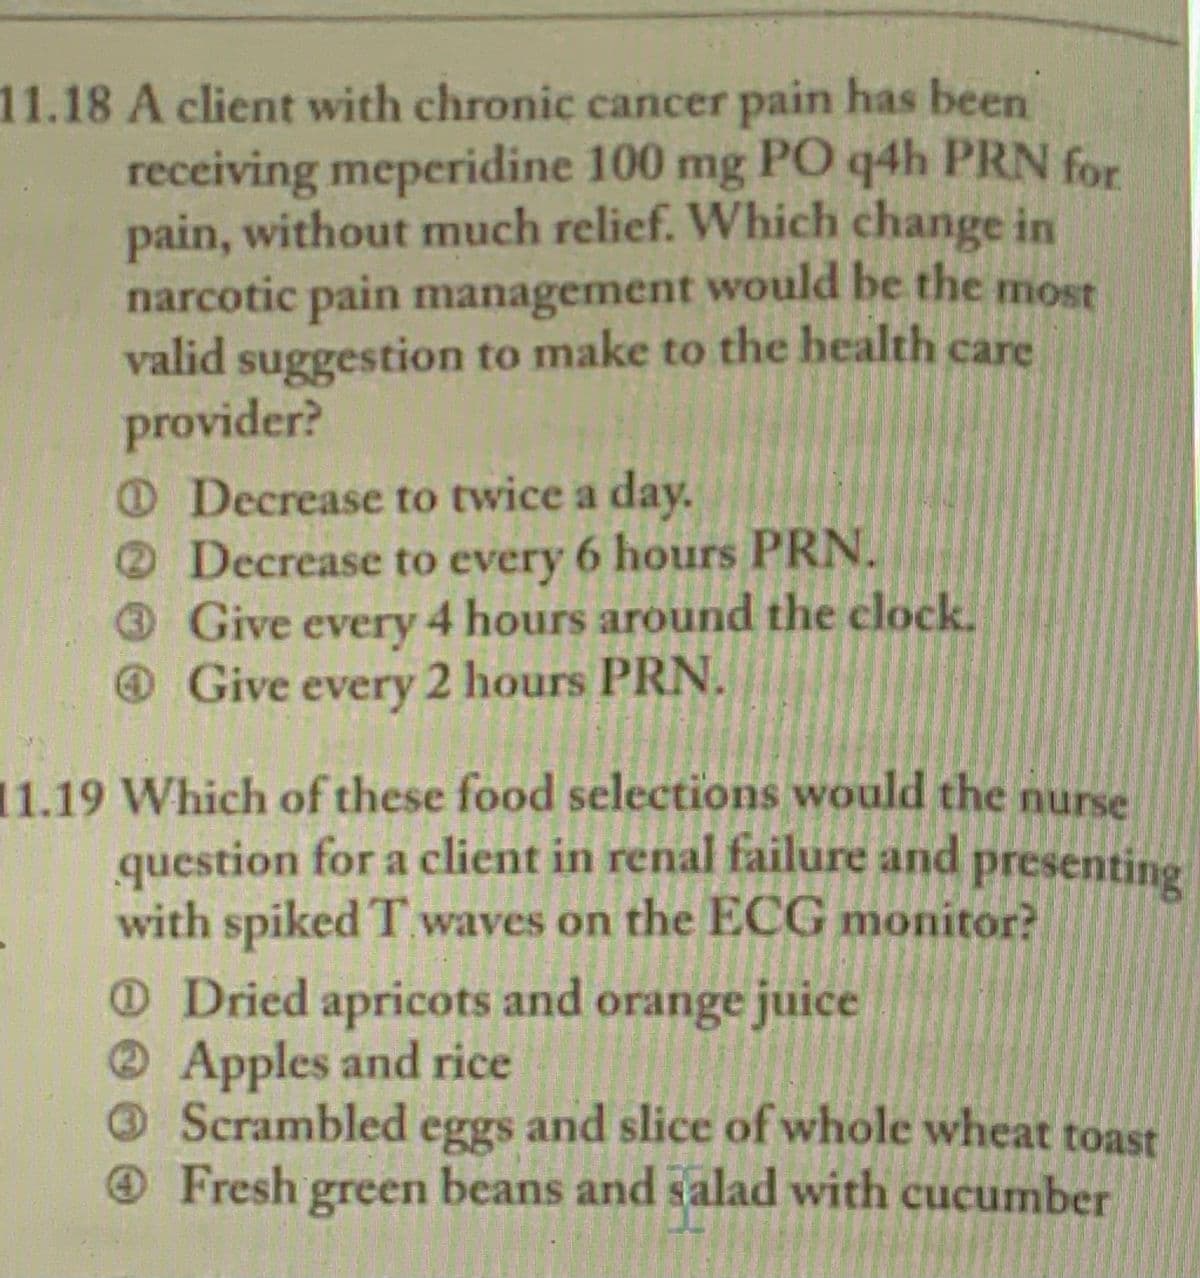 11.18 A client with chronic cancer pain has been
receiving meperidine 100 mg PO q4h PRN for
pain, without much relief. Which change in
narcotic pain management would be the most
valid suggestion to make to the health care
provider?
O Decrease to twice a day.
Decrease to every 6 hours PRN.
Give every 4 hours around the clock.
Give 2 hours PRN.
every
11.19 Which of these food selections would the nurse
question for a client in renal failure and
with spiked T waves on the ECG monitor?
ODried apricots and orange juice
presenting
Apples and rice
Scrambled and slice of whole wheat toast
Fresh green beans and salad with cucumber
eggs
